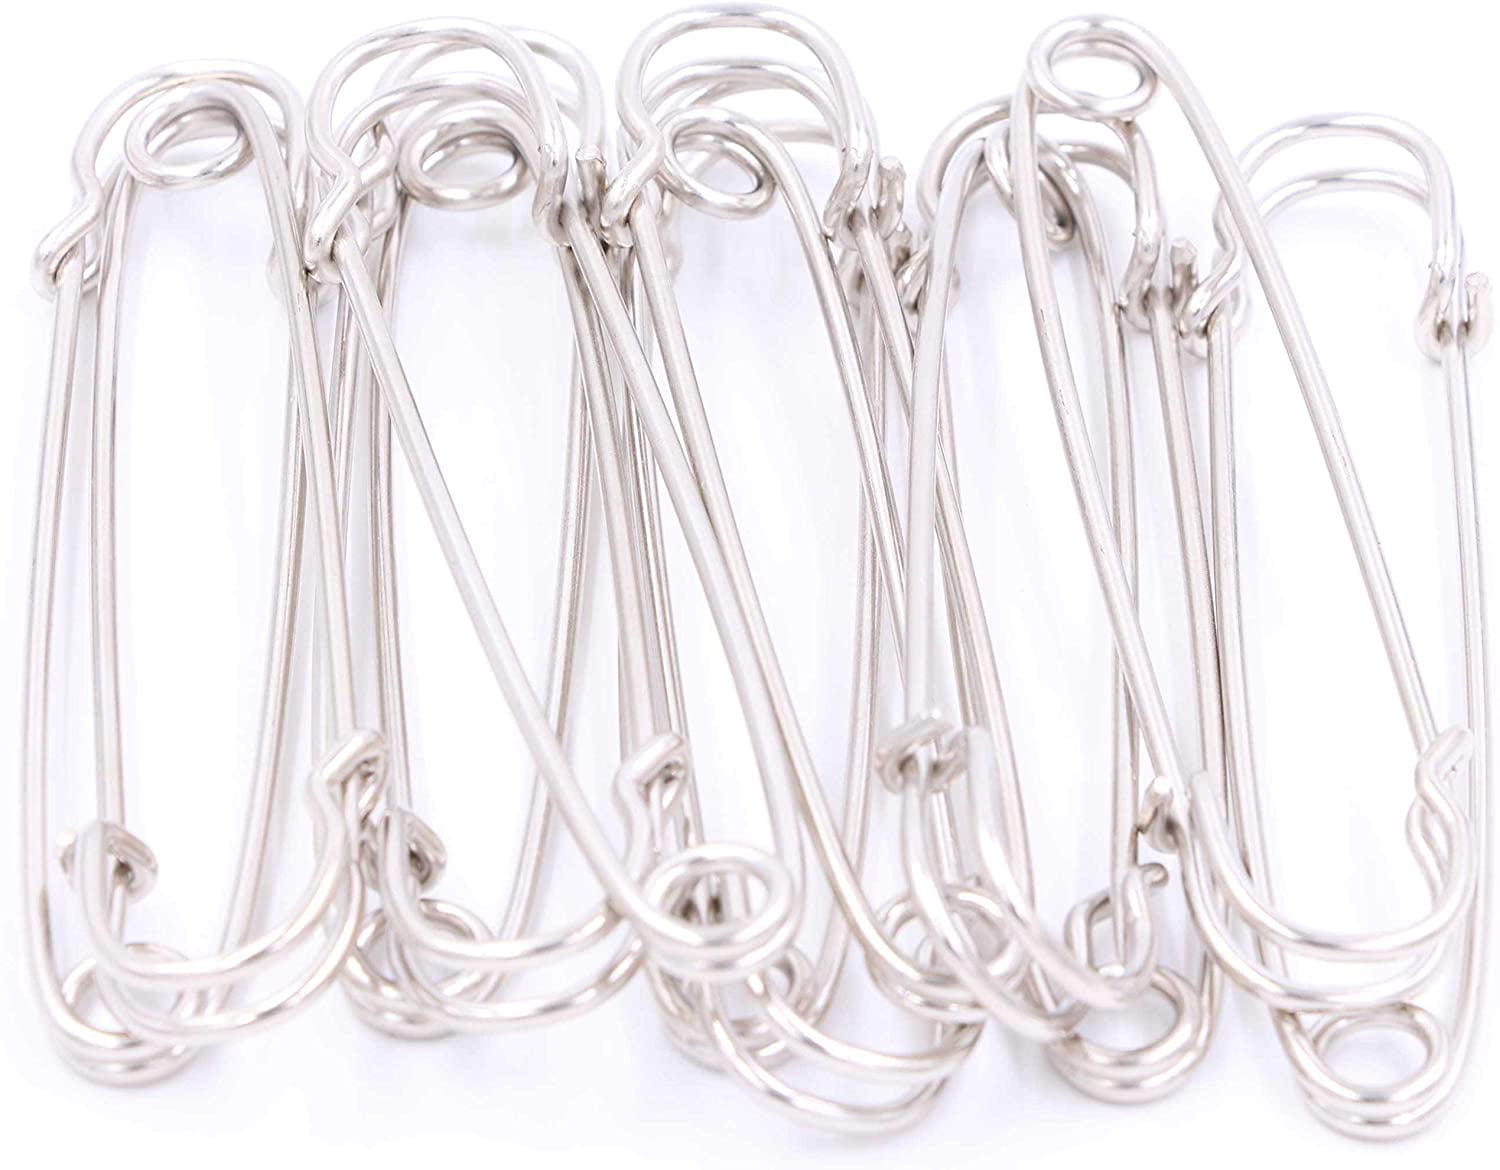 Safety Pins Large Heavy Duty Safety Pin - LeBeila 12pcs Blanket Pins 3 Inch  Stainless Steel Wire Safety Pin Extra Strong & Sturdy Bulk Pins for  Blankets Skirts Crafts Kilts (12pcs Silver)